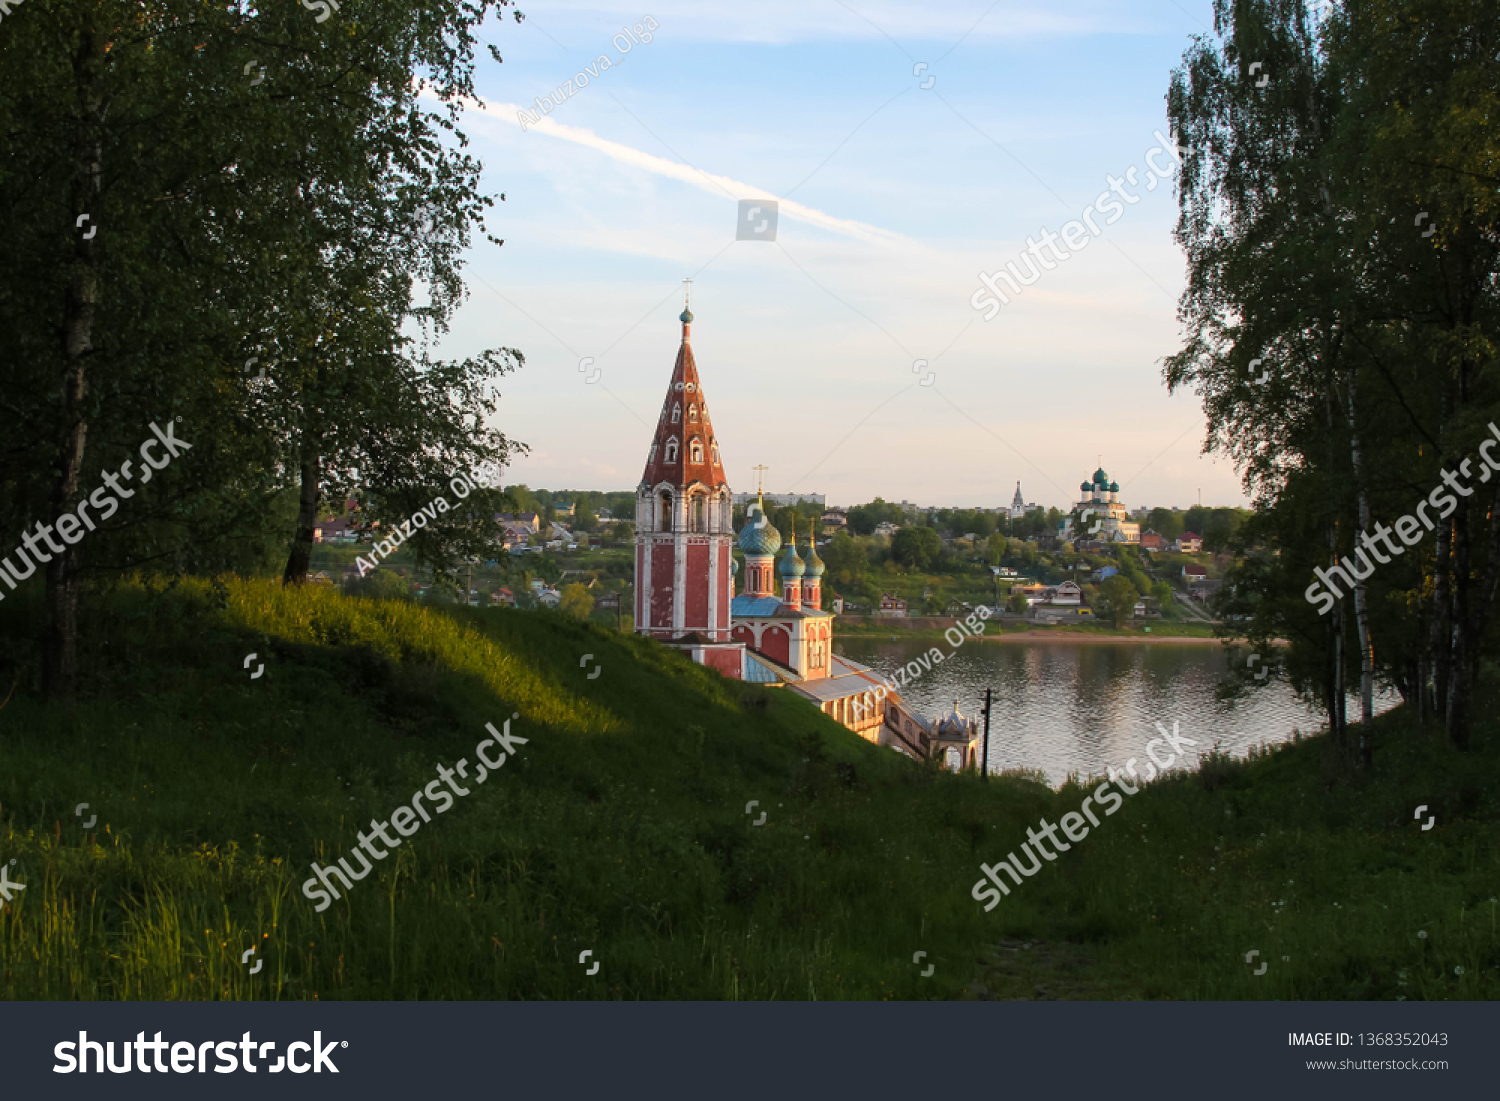 Churches, buildings and attractions of the city of Tutaev, Yaroslavl region #1368352043